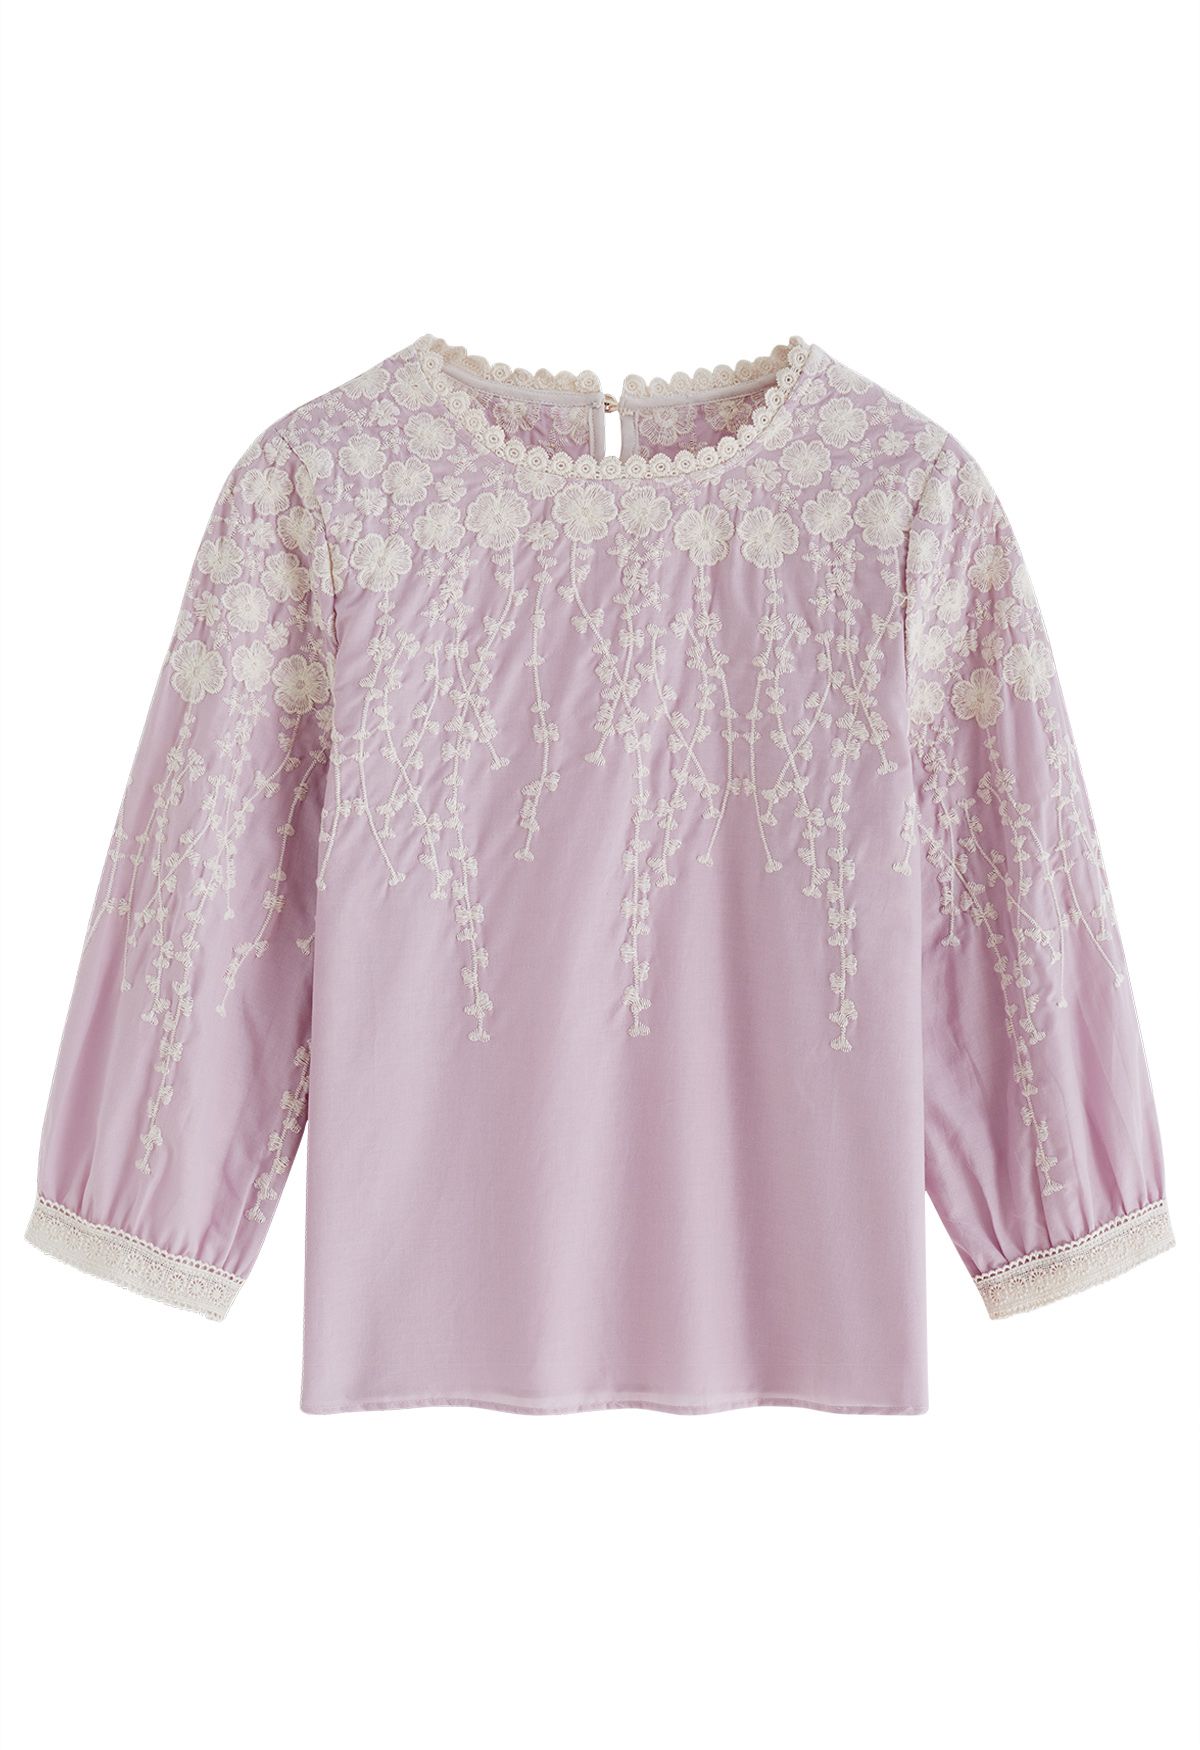 Clover Branch Embroidered Dolly Top in Lilac